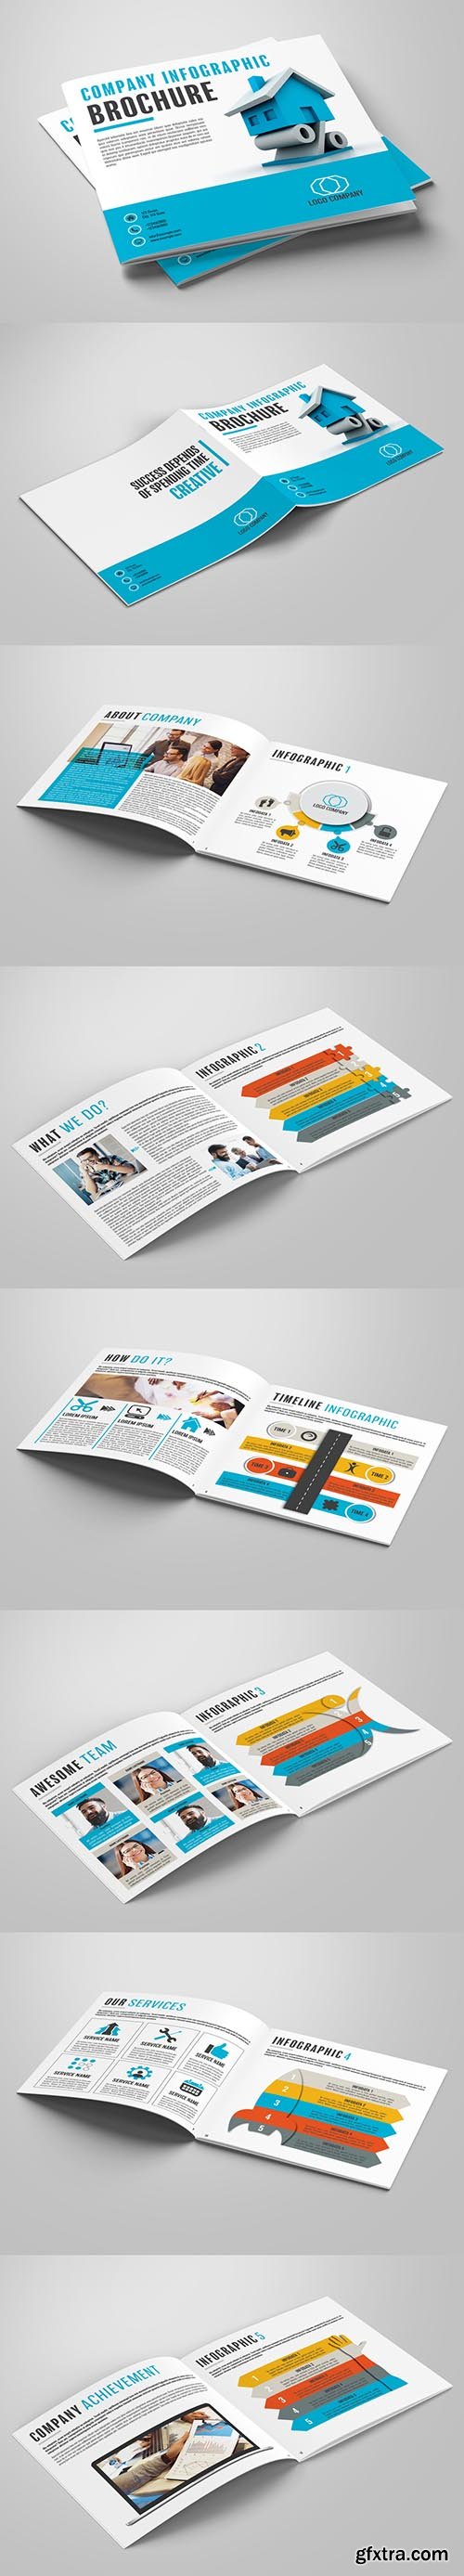 Infographic Brochure Layout 204406784